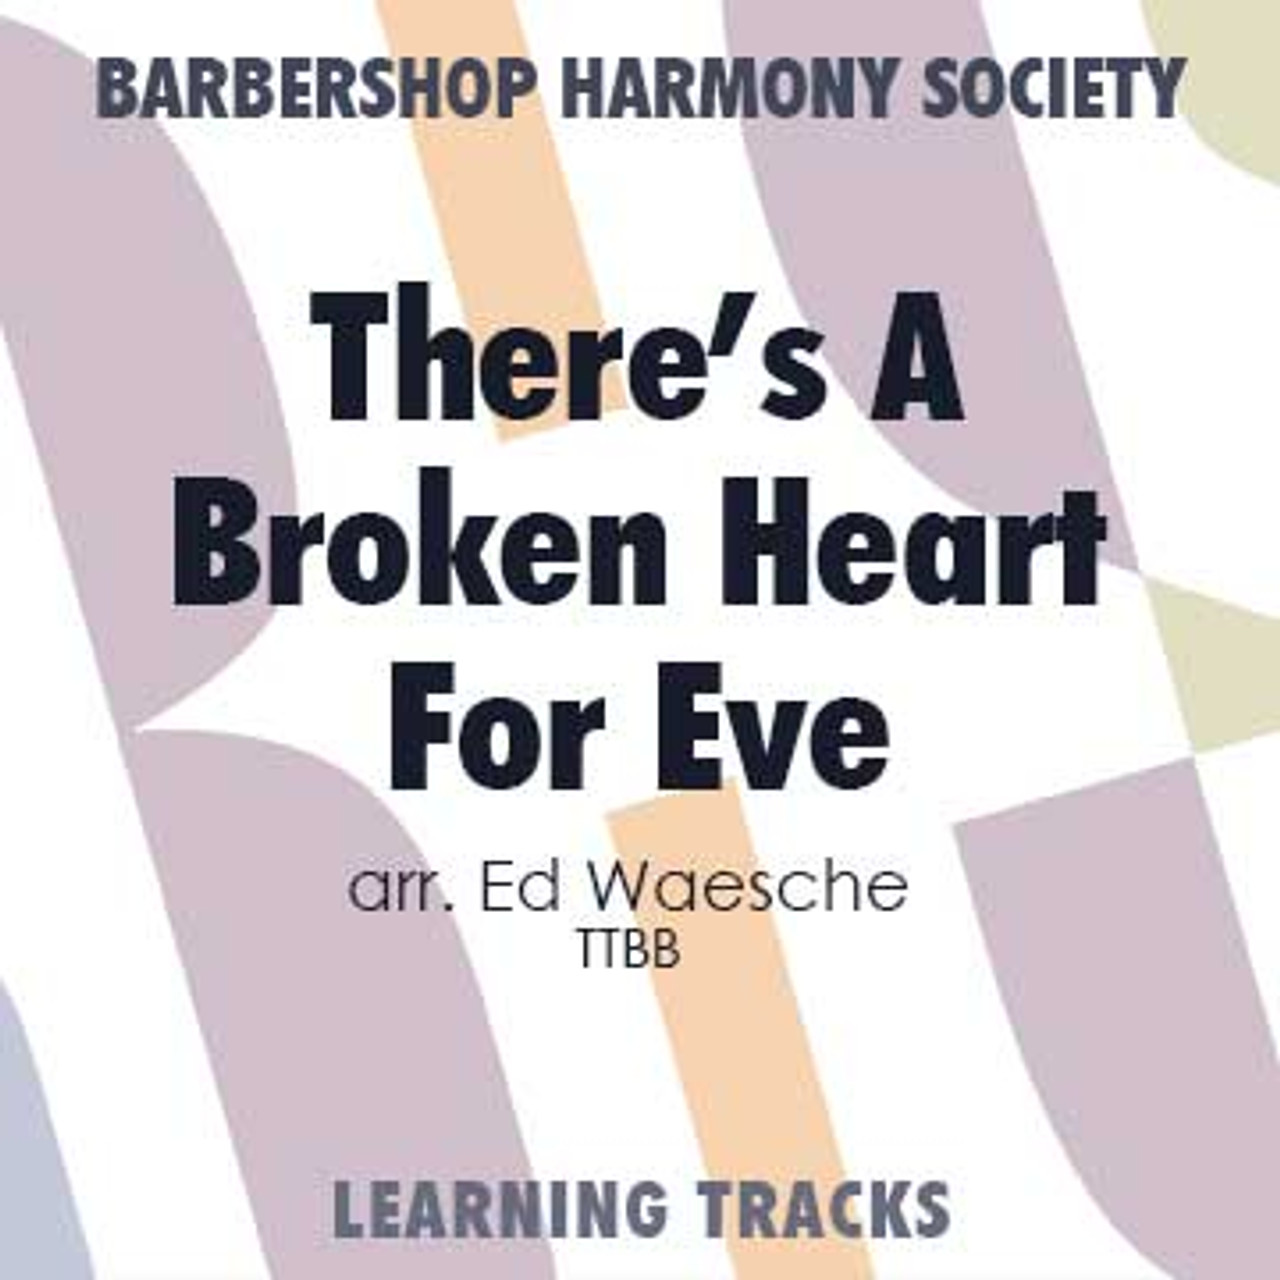 There's A Broken Heart For Every Light On Broadway (TTBB) (arr. Waesche) - Digital Learning Tracks for 8806